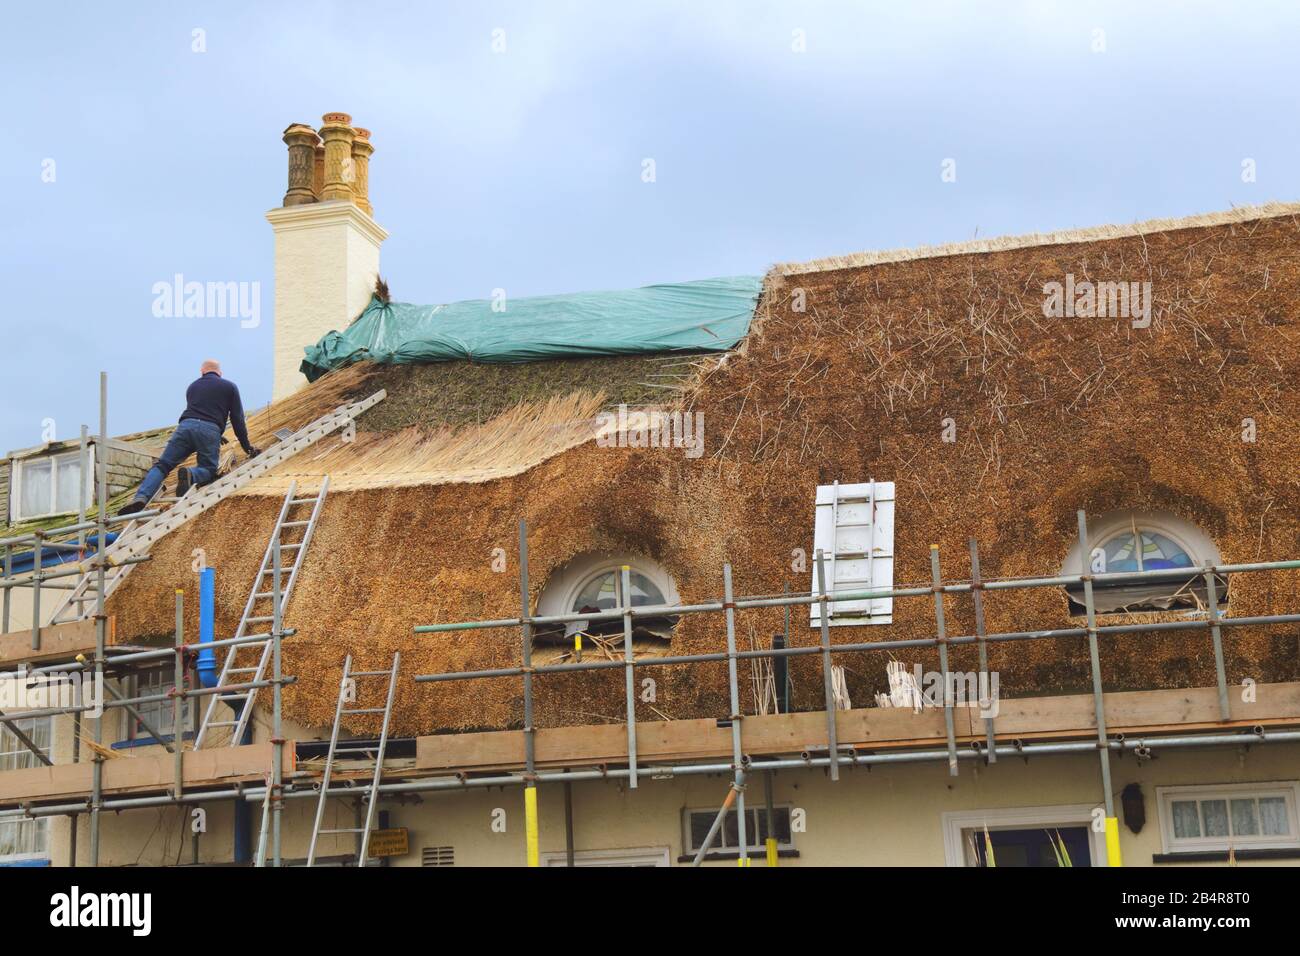 Worker thatching a roof with water reed in Sidmouth, Devon Stock Photo